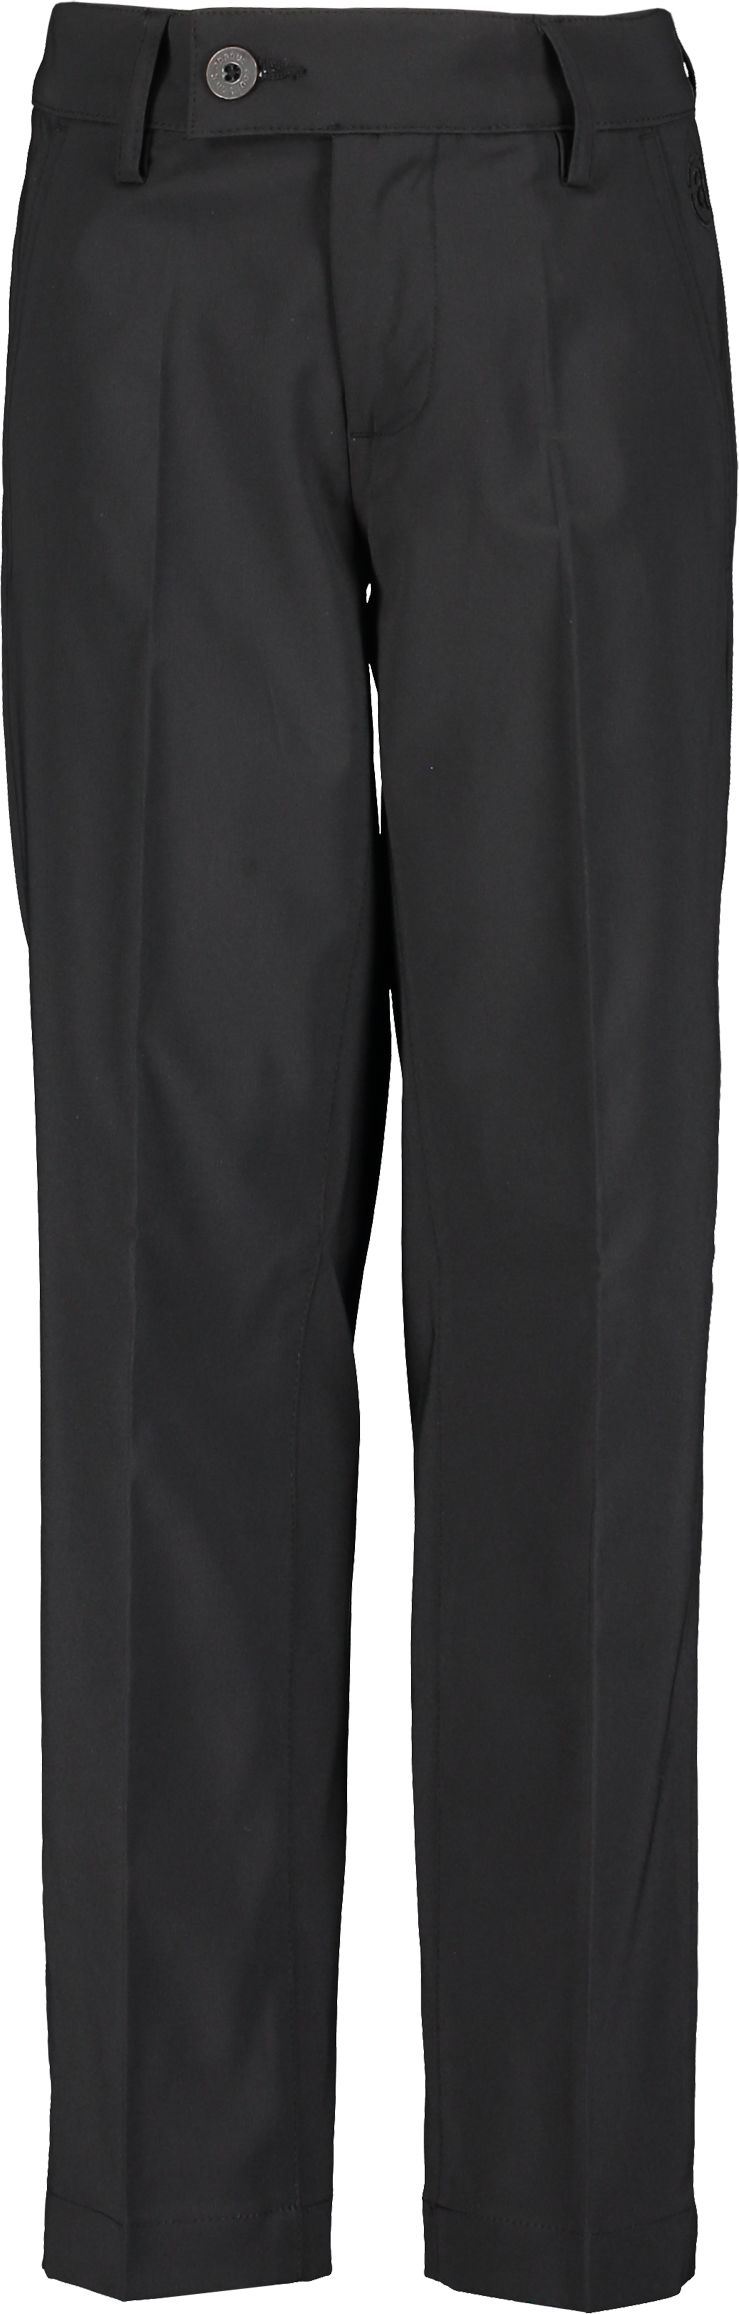 ABACUS, Jr Cleek stretch trousers